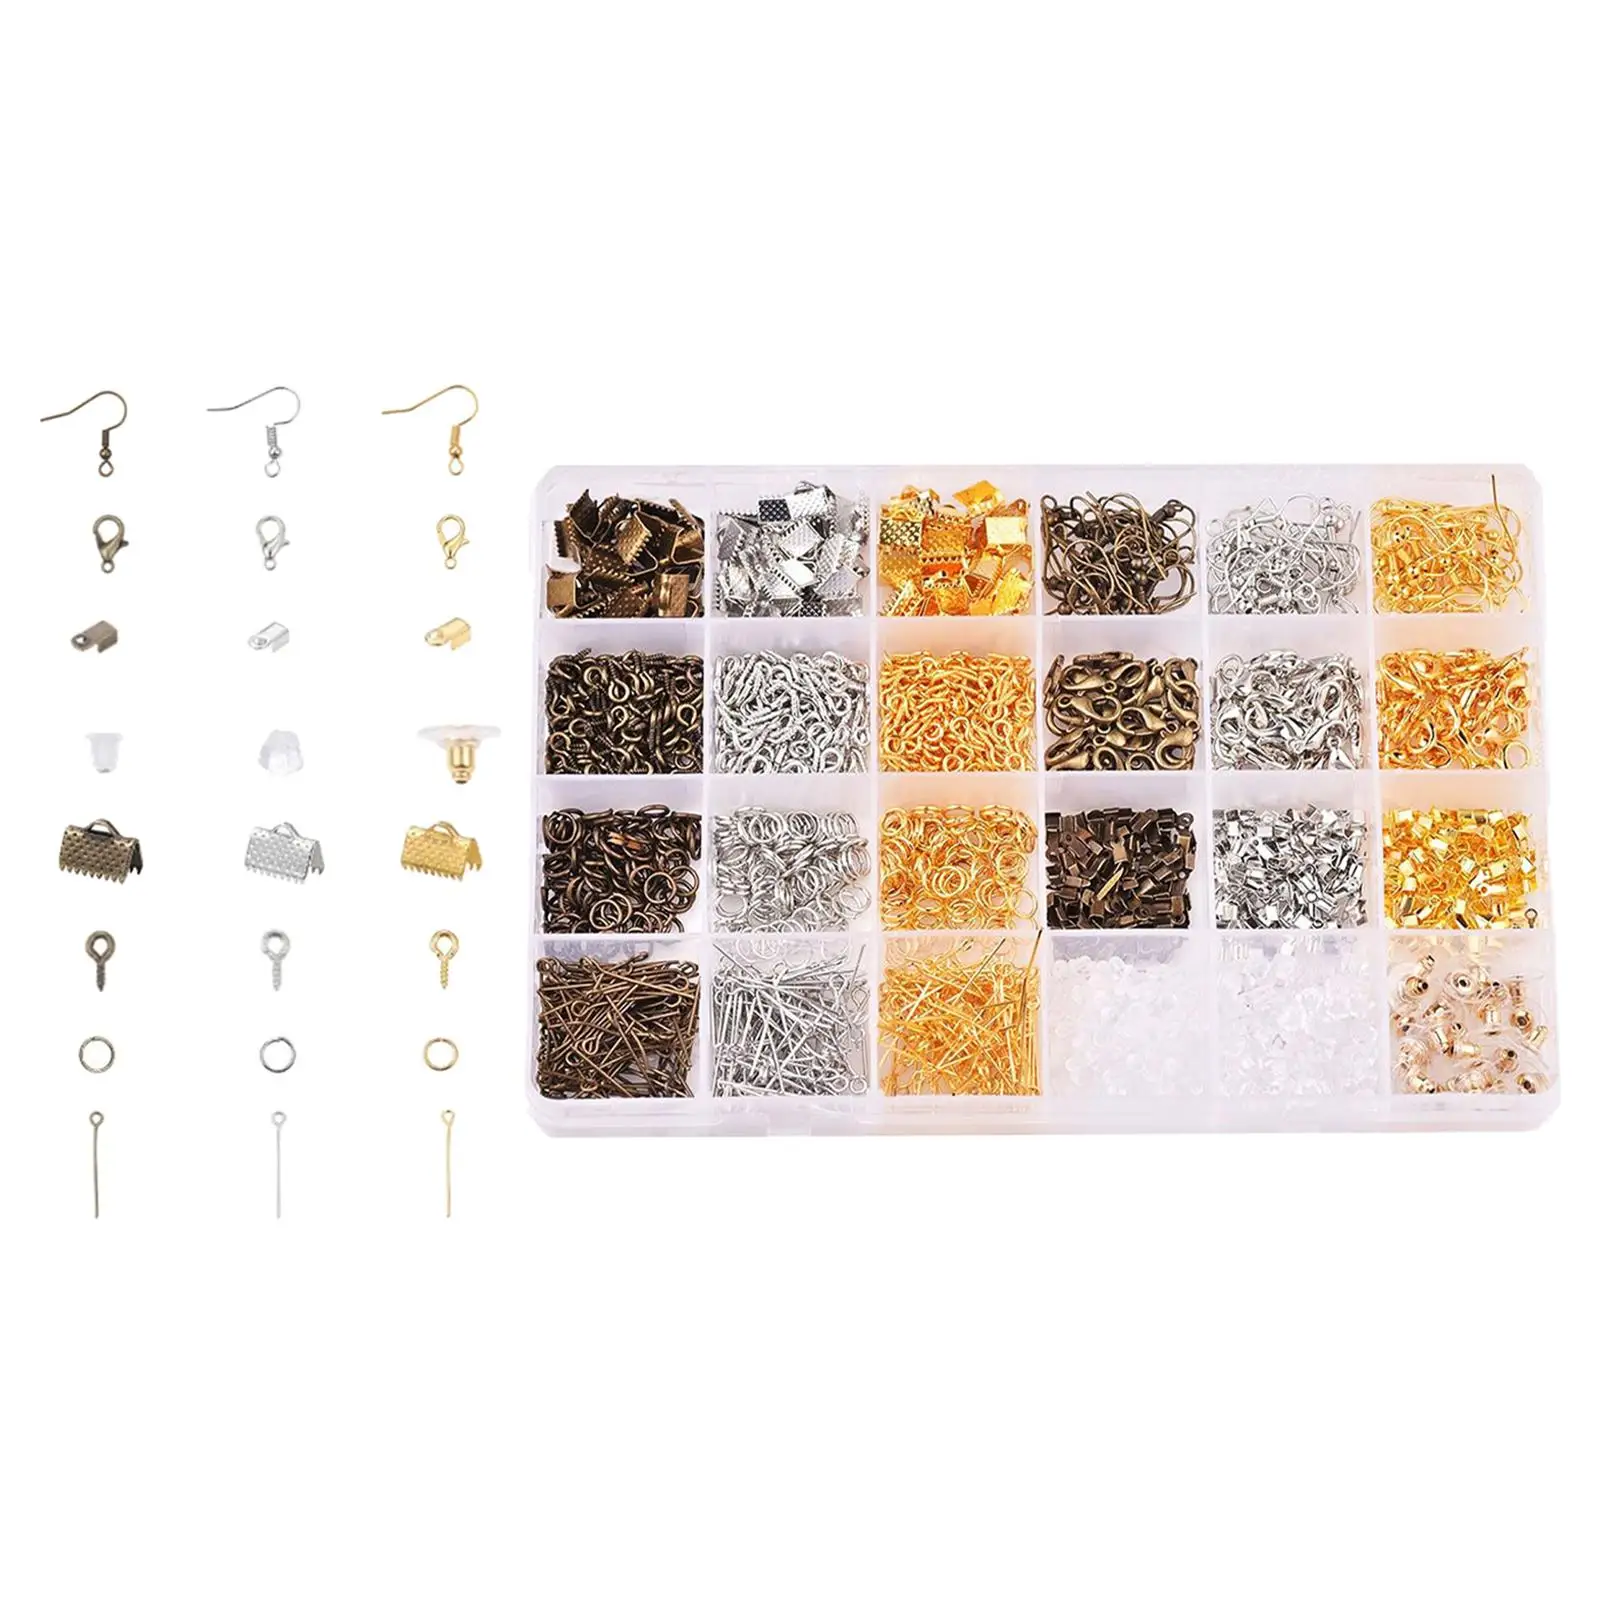 1700Pcs Earring Making Supplies Kit Earring Backs Lobster Clasps Earring Finding for DIY Necklace Jewelry Making Repairing